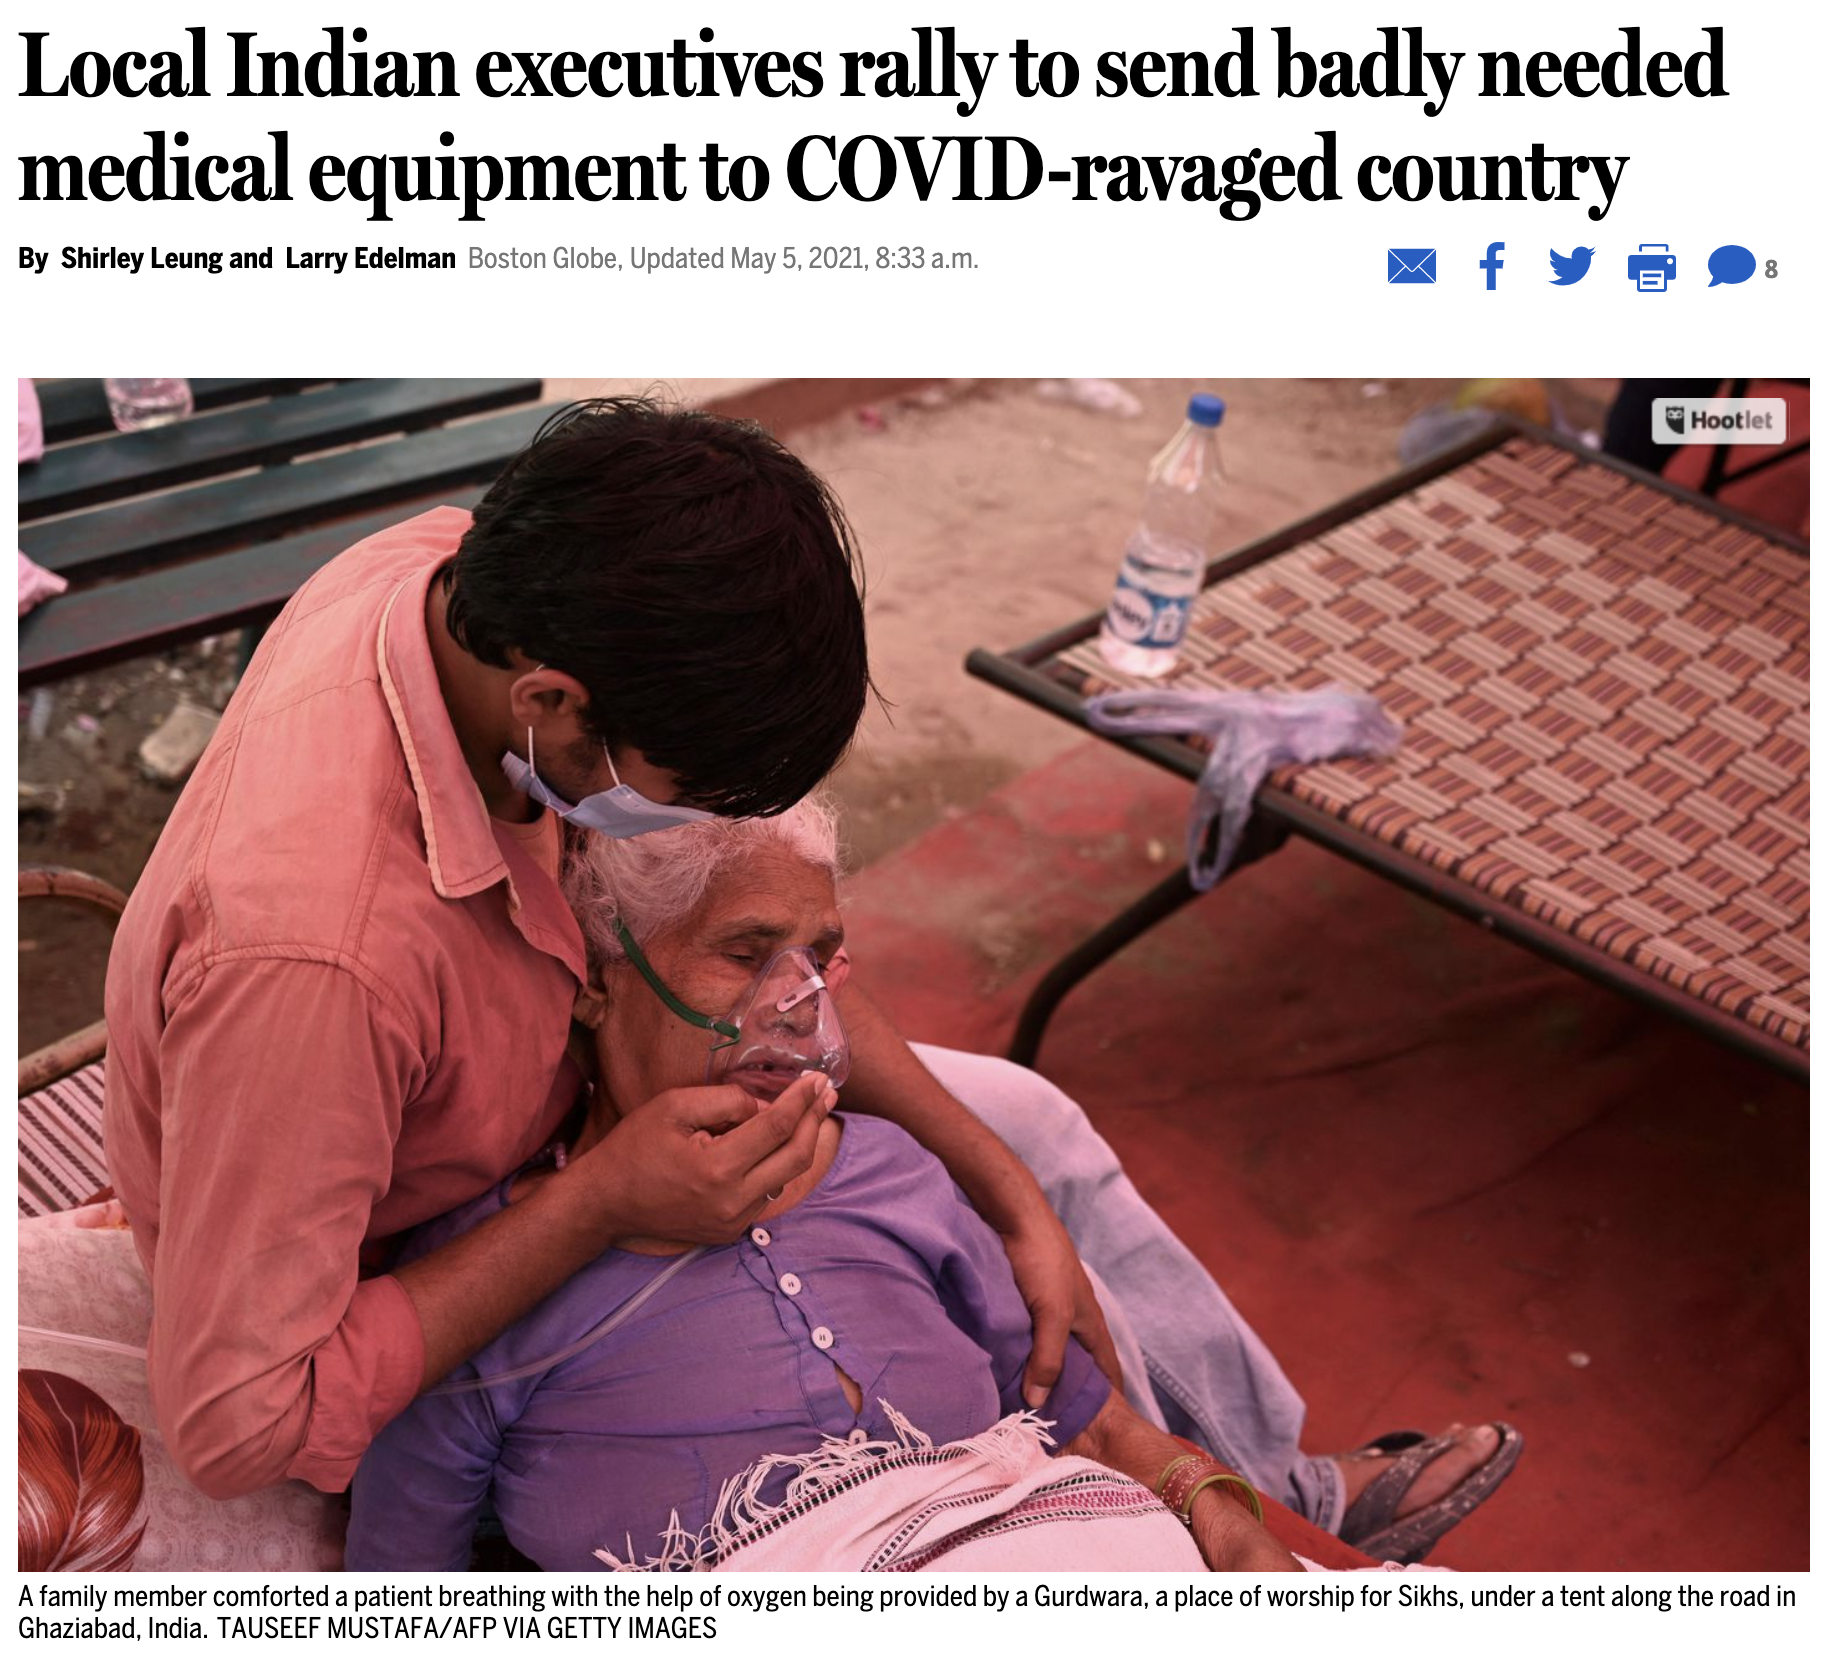 Local Indian executives rally to send badly needed medical equipment to COVID-ravaged country